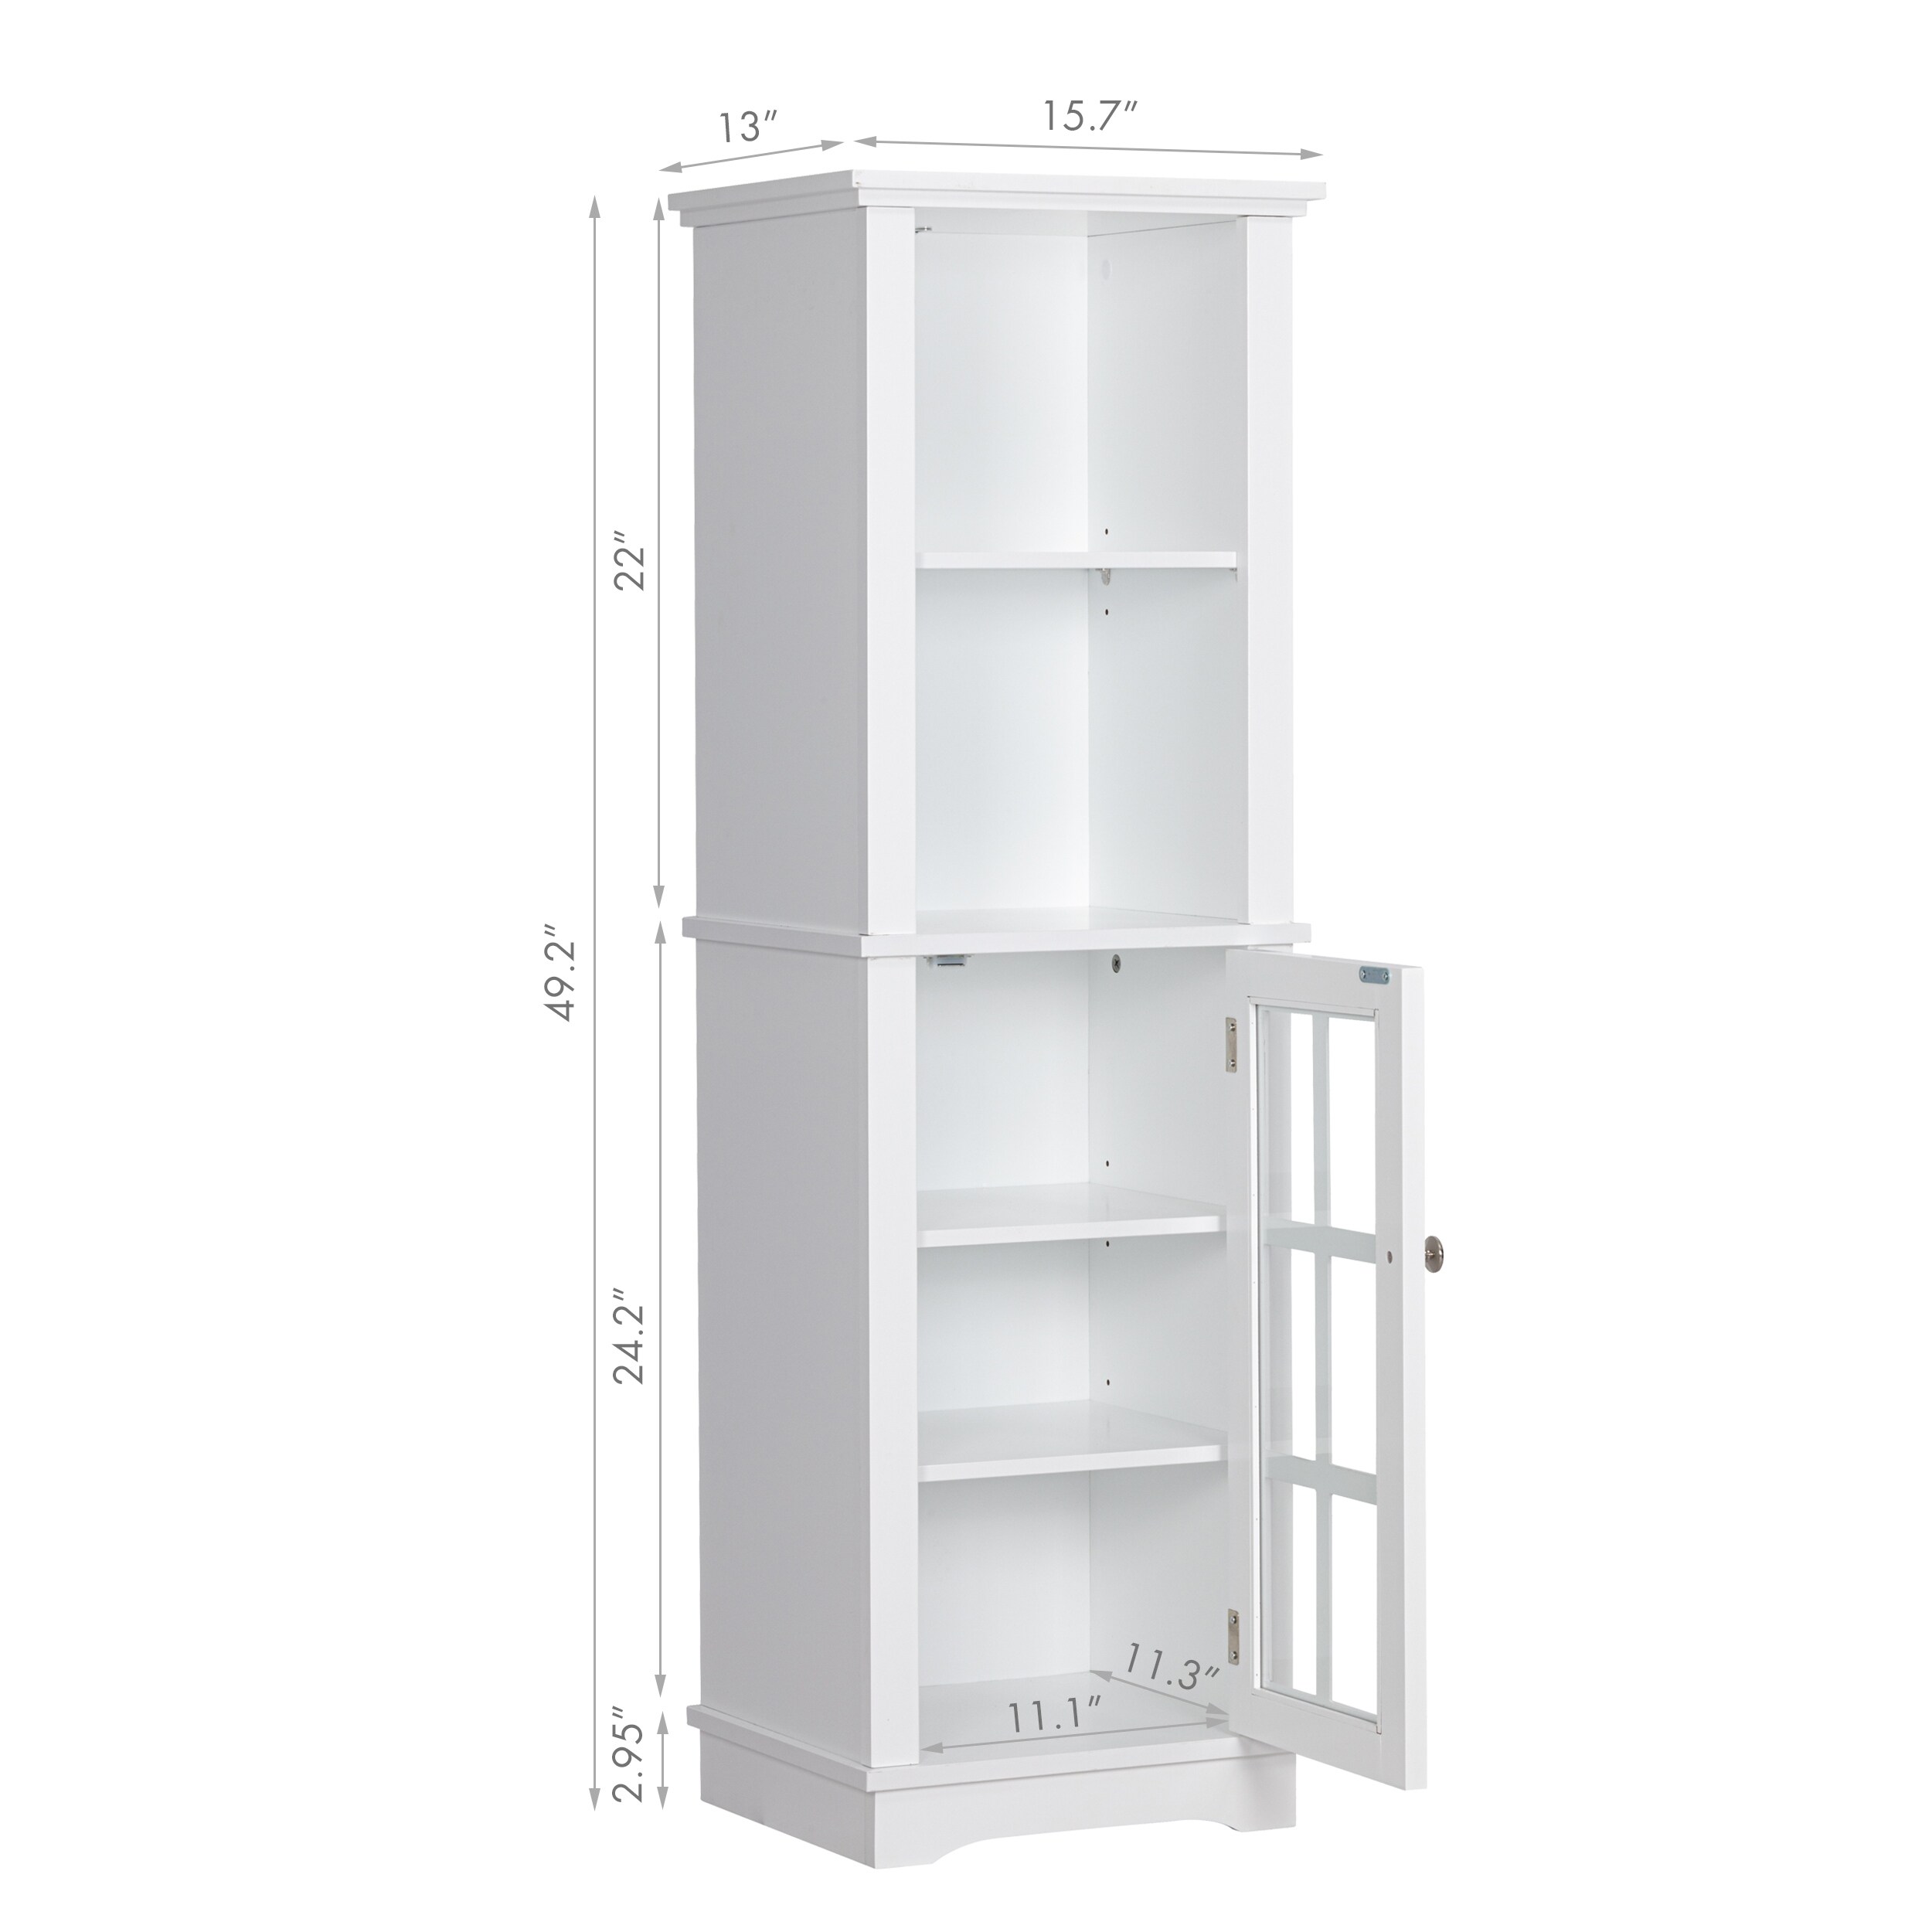 https://ak1.ostkcdn.com/images/products/is/images/direct/7658ad10dc54a24ca164e7f382bce8056b98c429/Spirich-Home-Tall-Narrow-Storage-Cabinet%2C-Bathroom-Floor-Slim-Cabinet-with-Glass-Doors%2C-Freestanding-Linen-Tower%2C-White.jpg